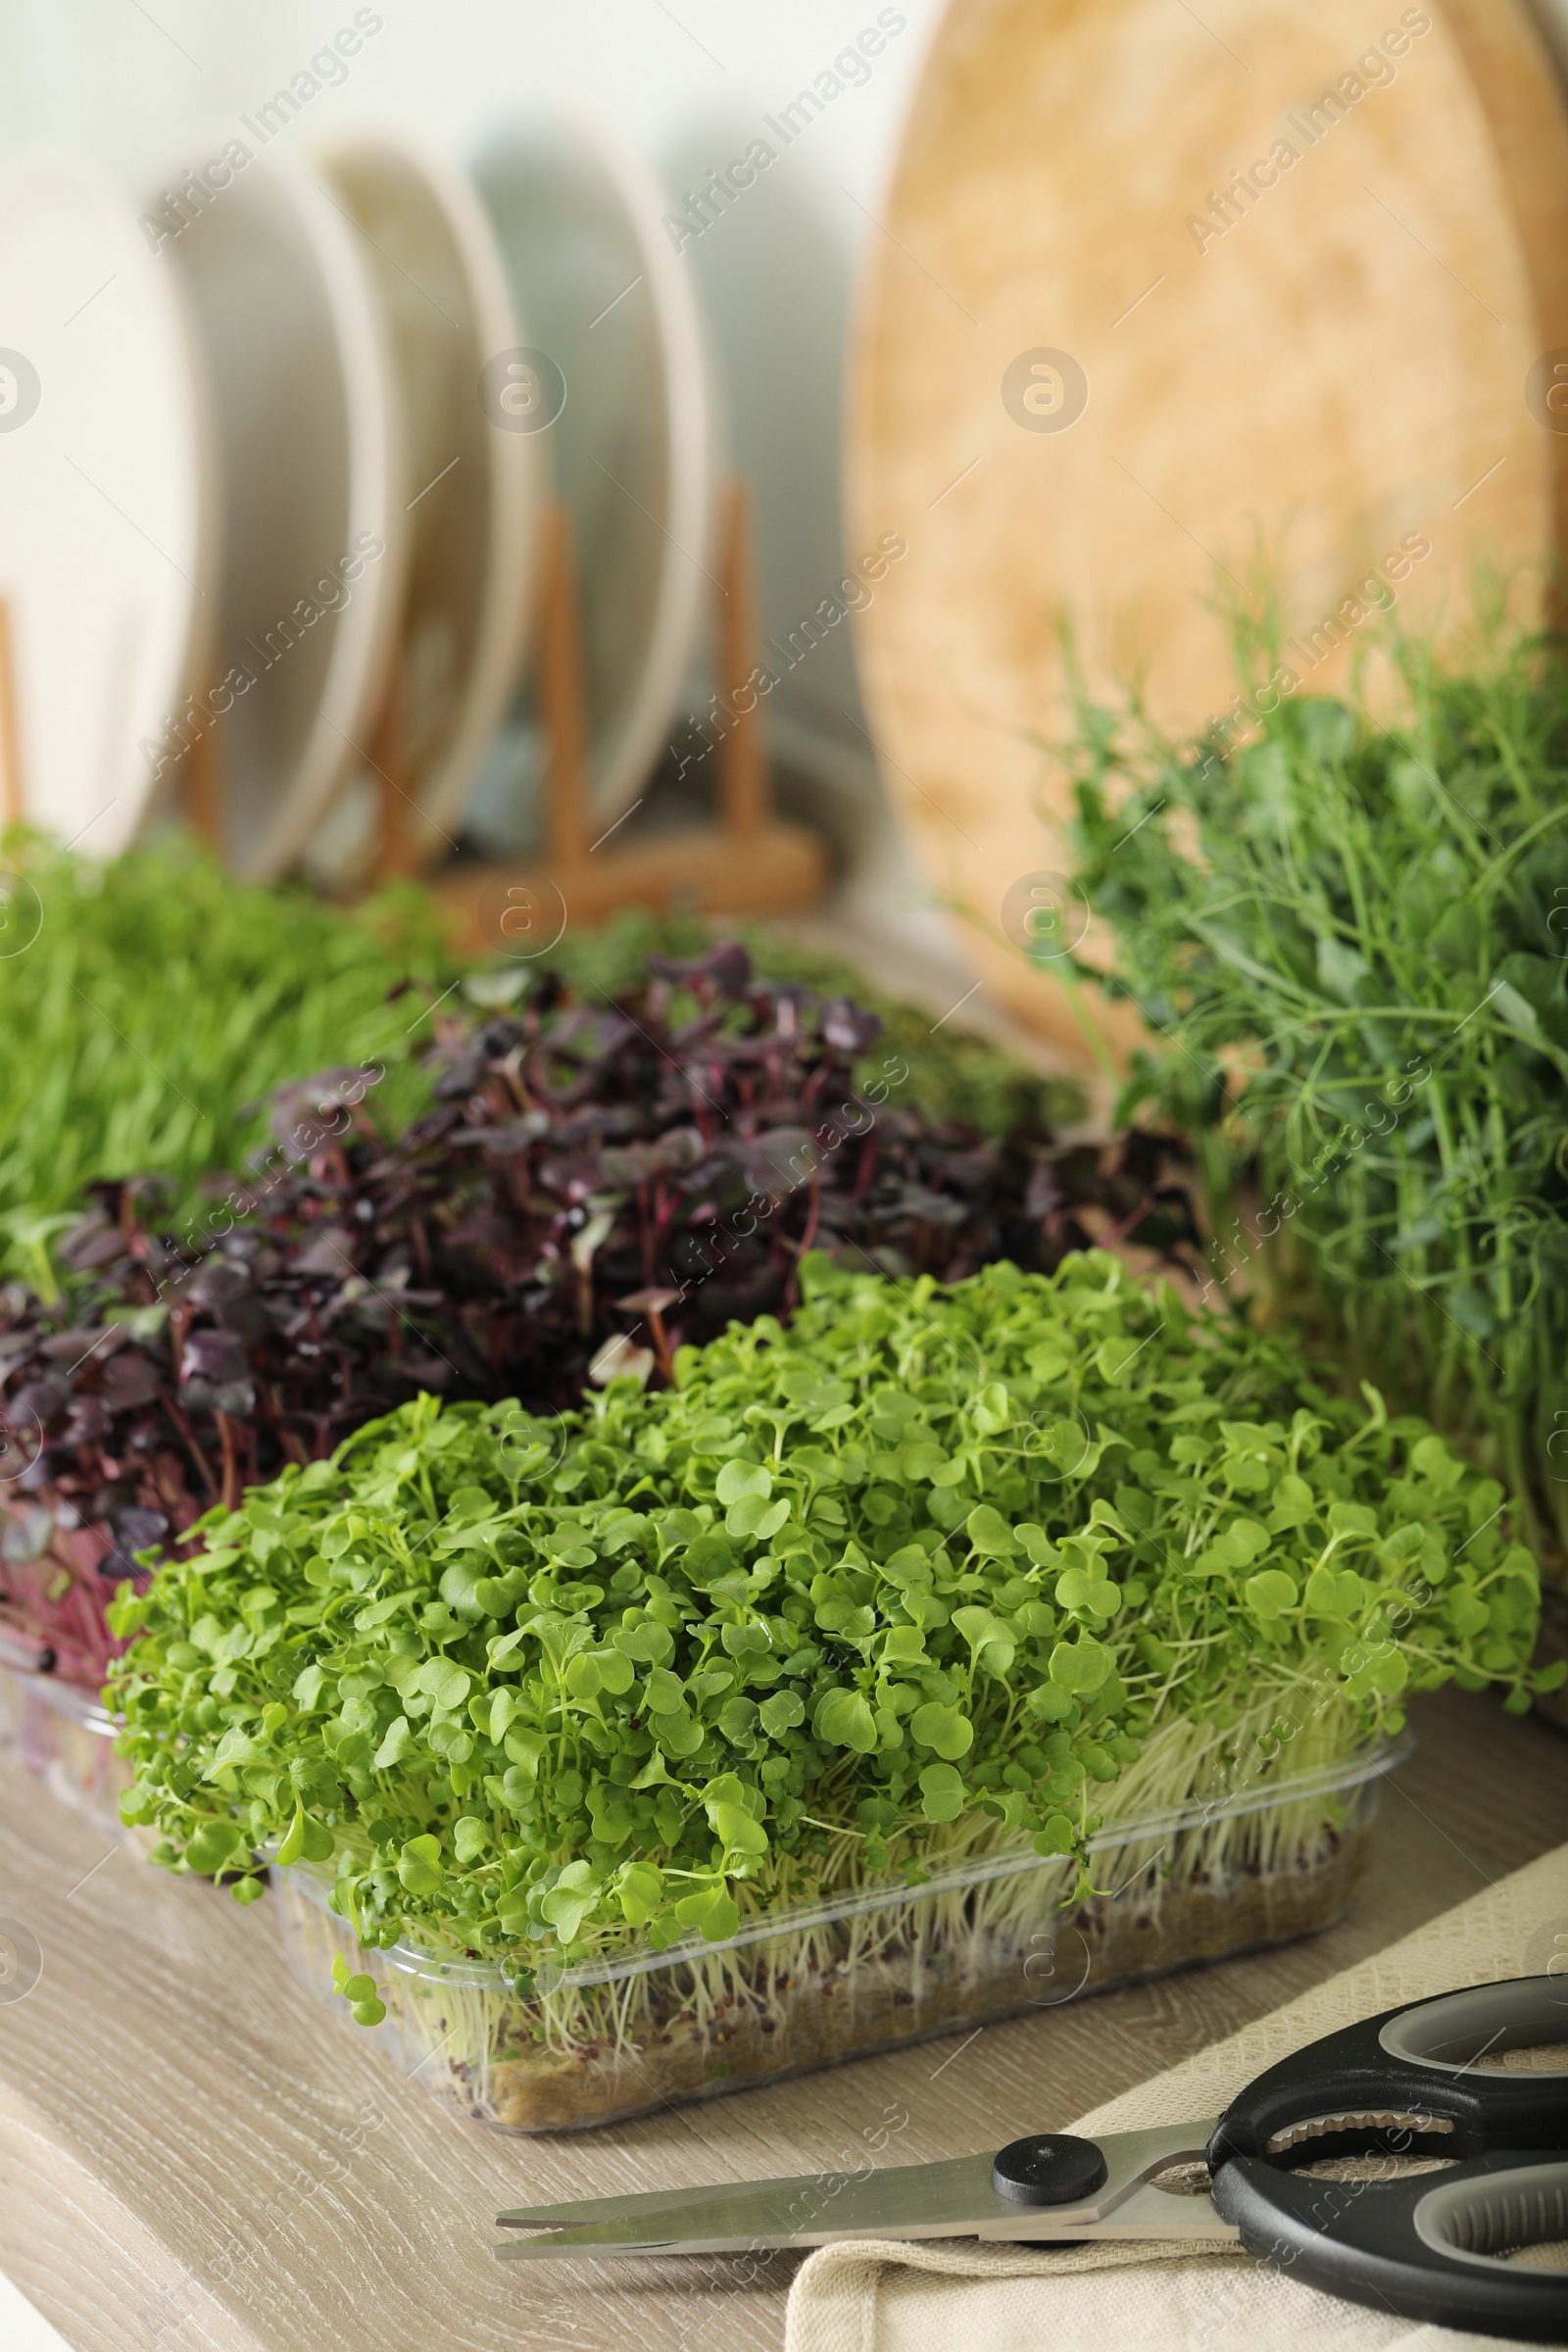 Photo of Different fresh microgreens in plastic containers and scissors on countertop in kitchen